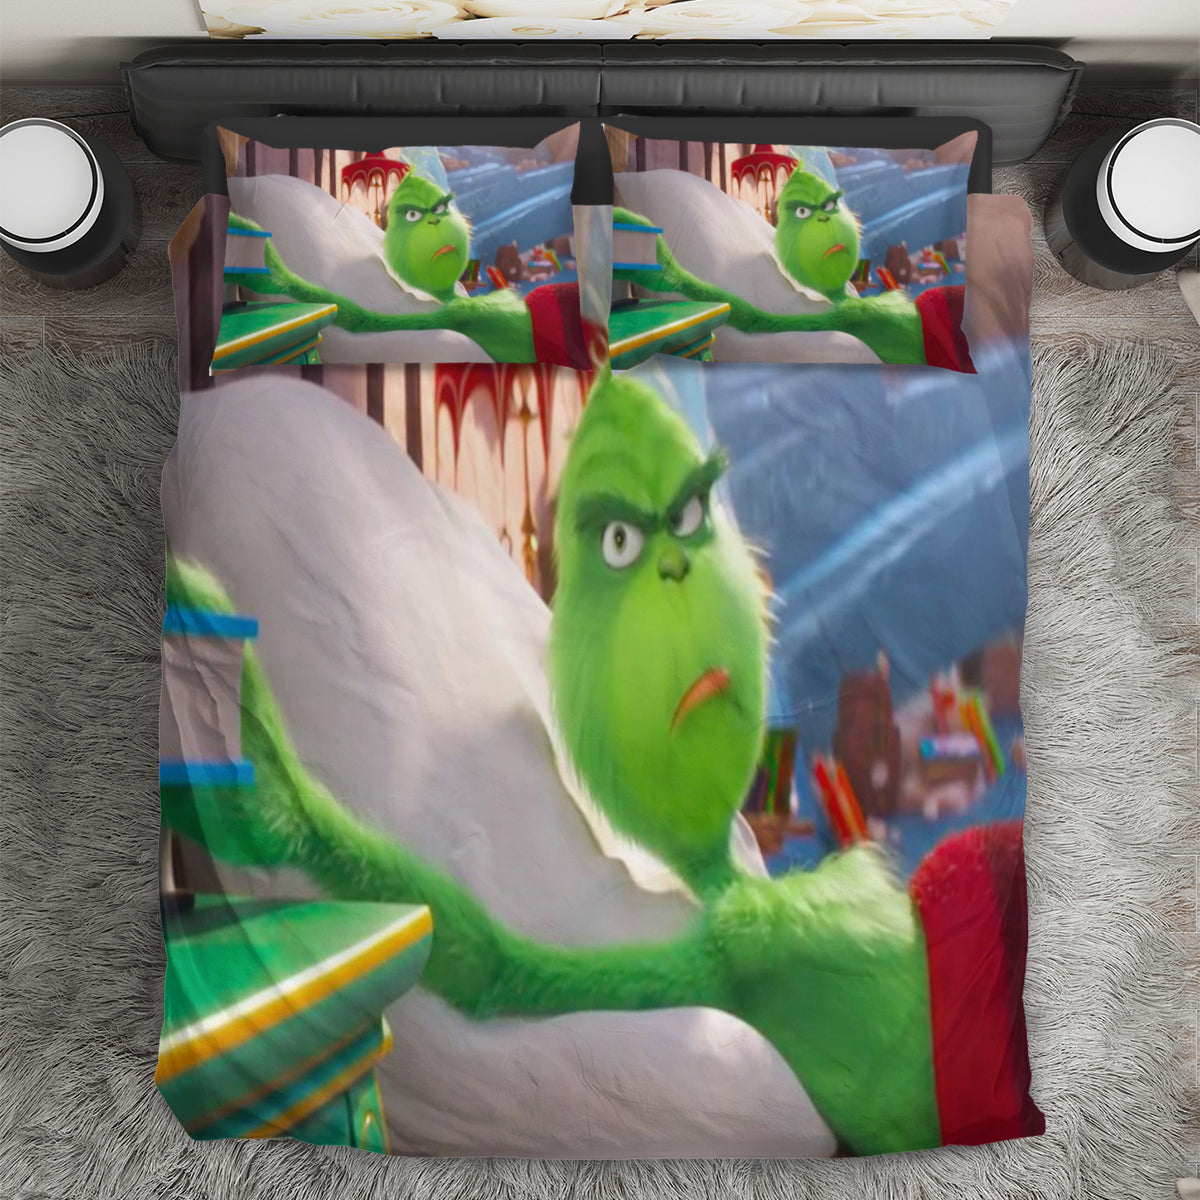 The Grinch Christmas Grinch Sleeping 2 3PCS Bedding Set Duvet Cover And Pillow Cases Gift For Fan